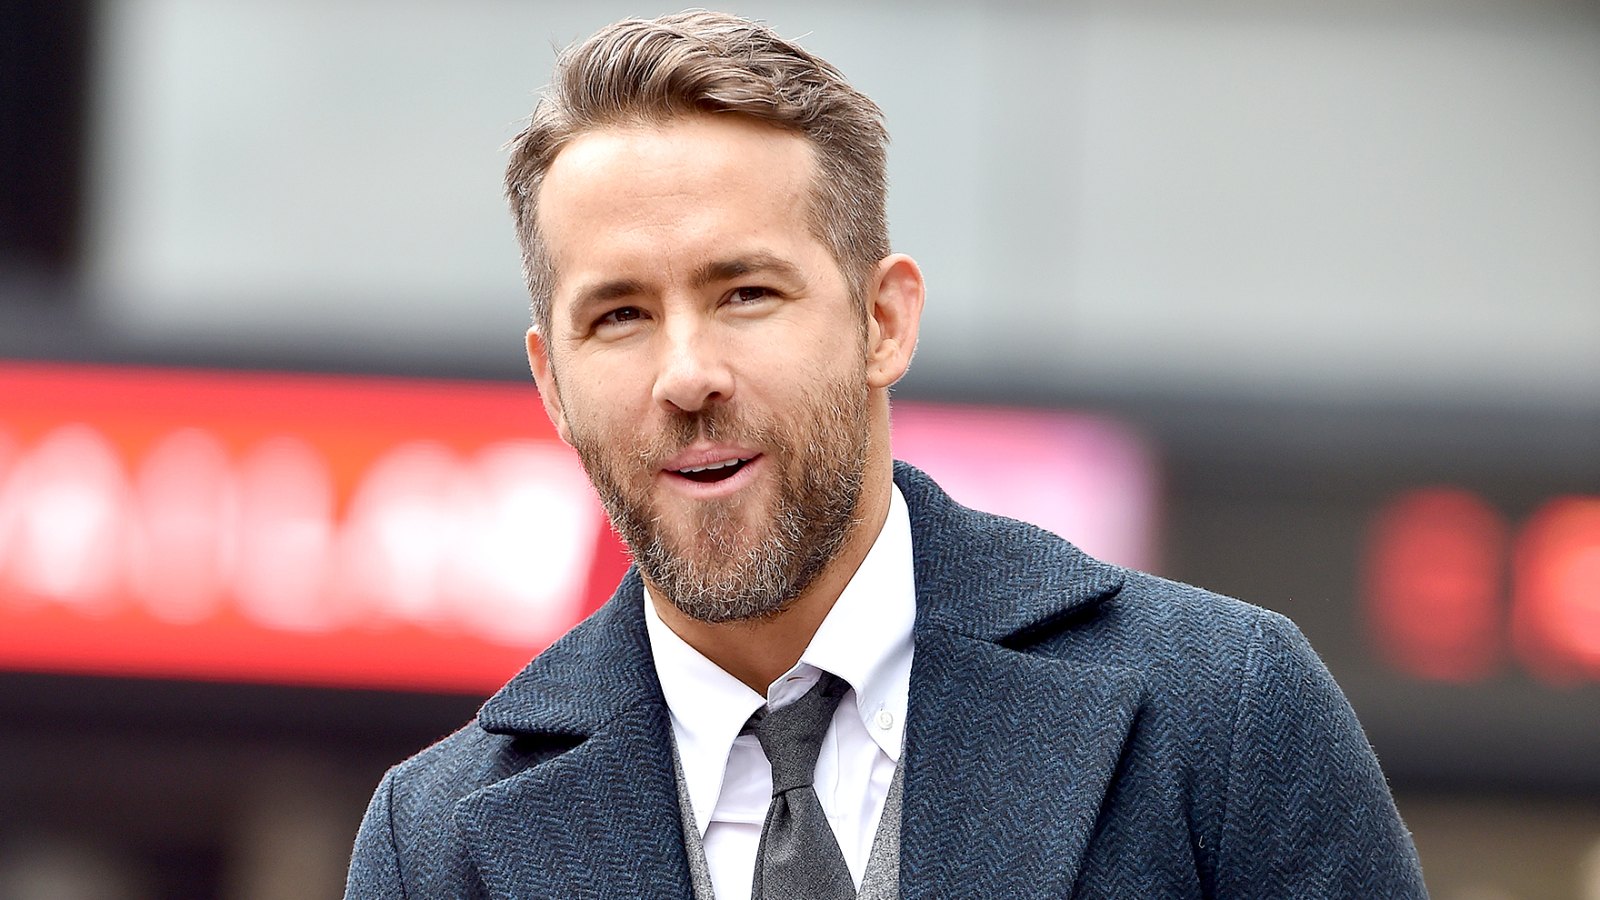 Ryan Reynolds honored with Star on the Hollywood Walk of Fame on December 15, 2016 in Hollywood, California.